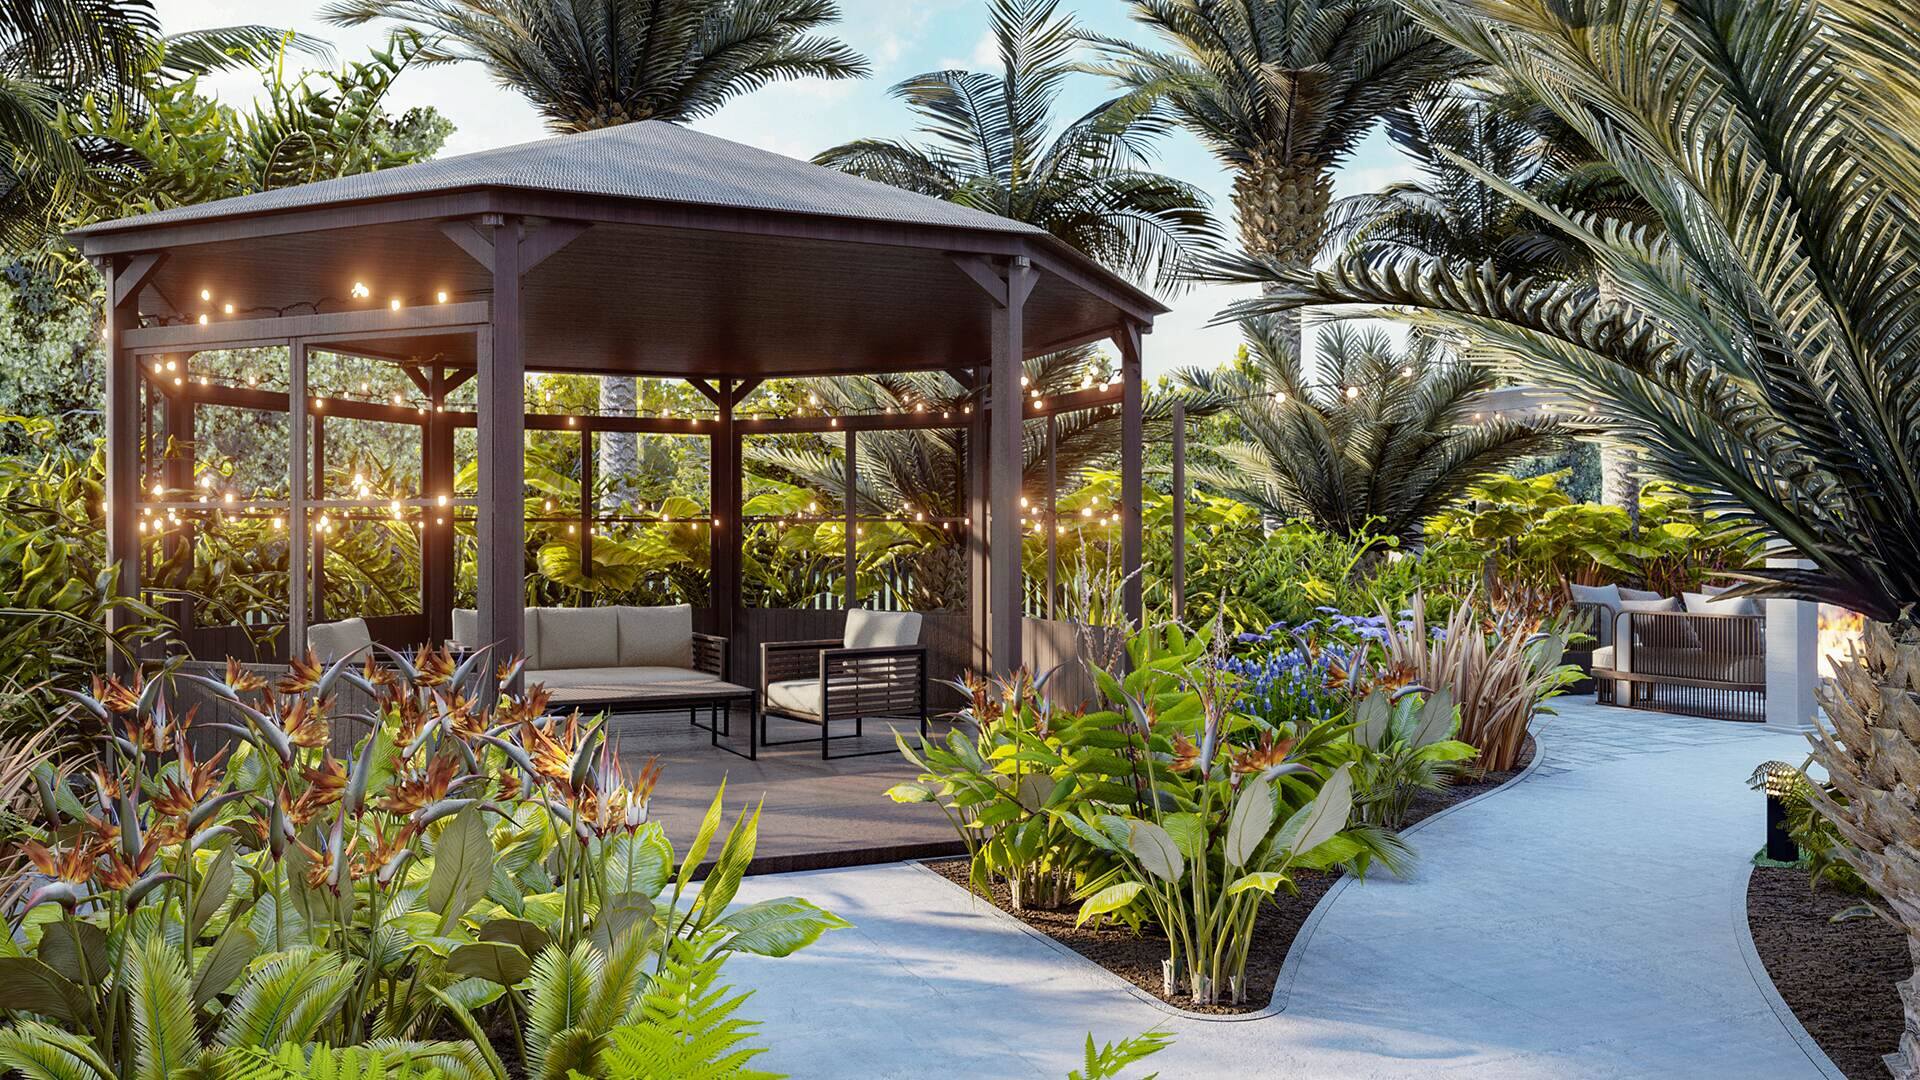 A sheltered patio or gazebo with adjustable features, furnished in a Mediterranean style, offering a comfortable and adaptable outdoor living space.